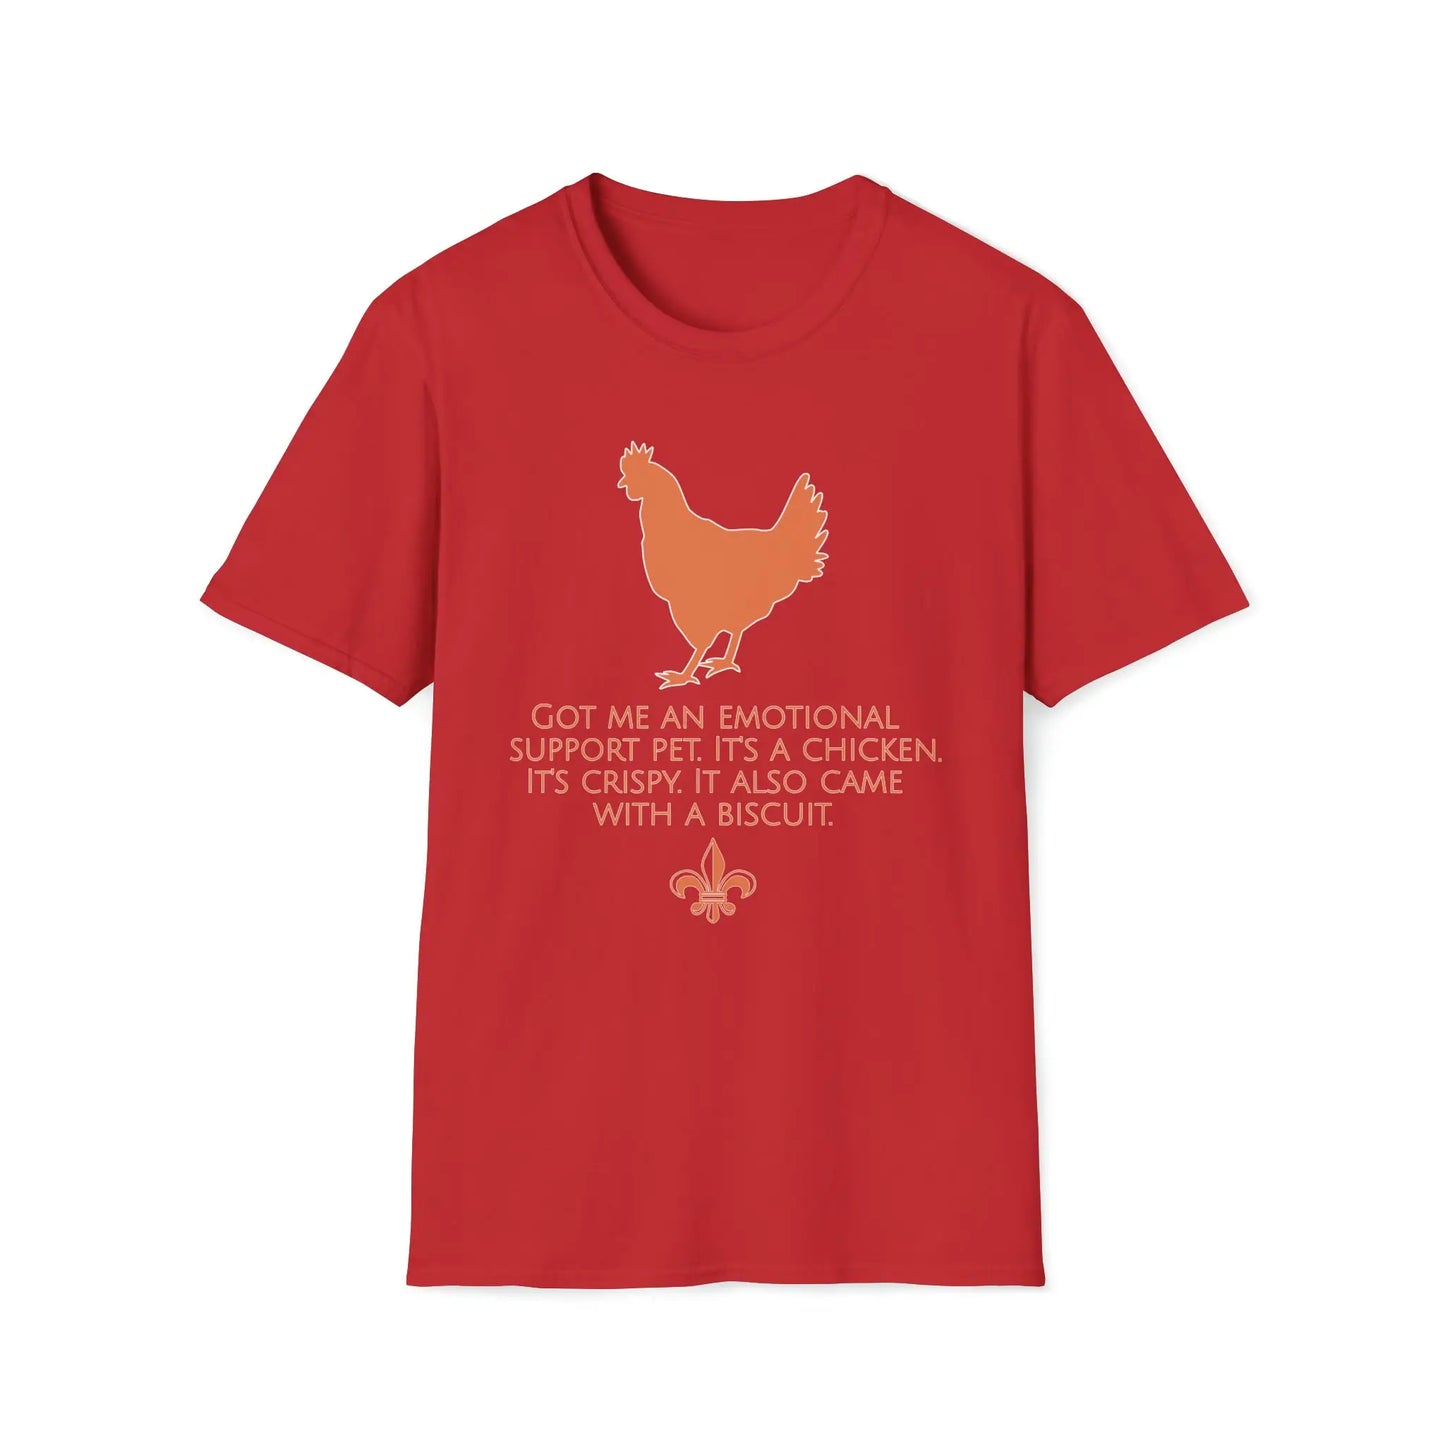 Cluck Yes Women's Tee - Wicked Tees